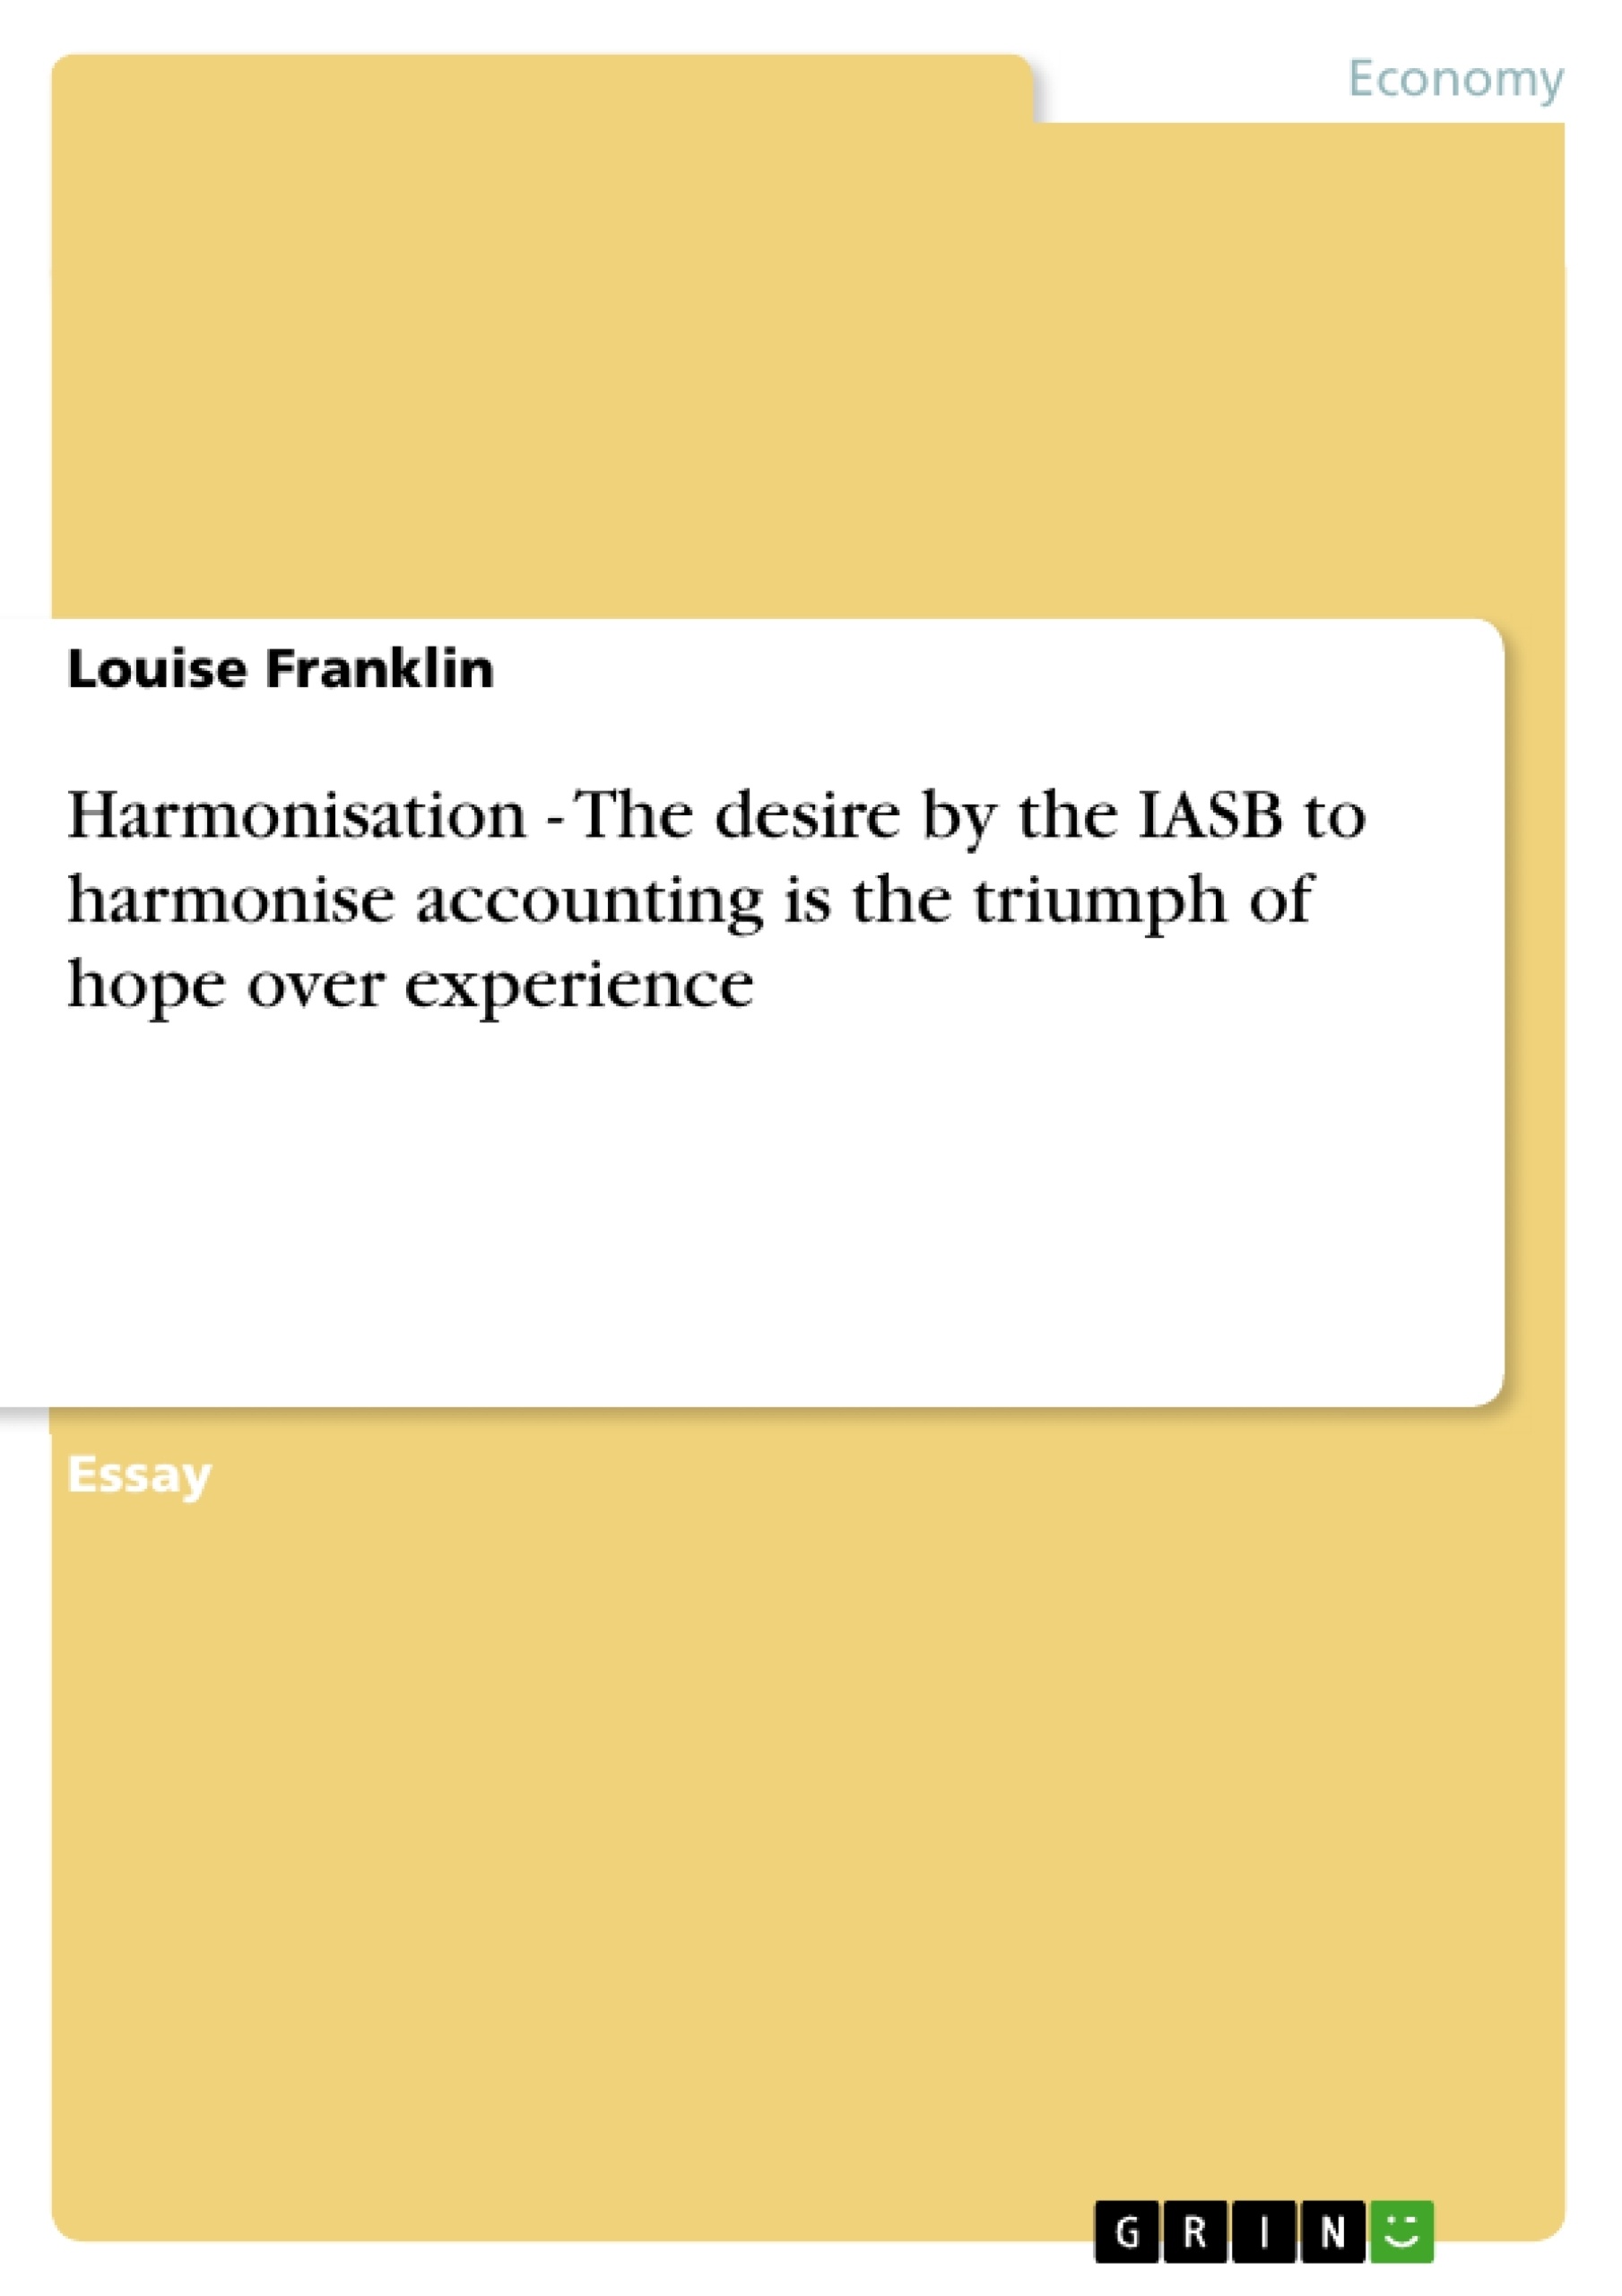 Titre: Harmonisation - The desire by the IASB to harmonise accounting is the triumph of hope over experience